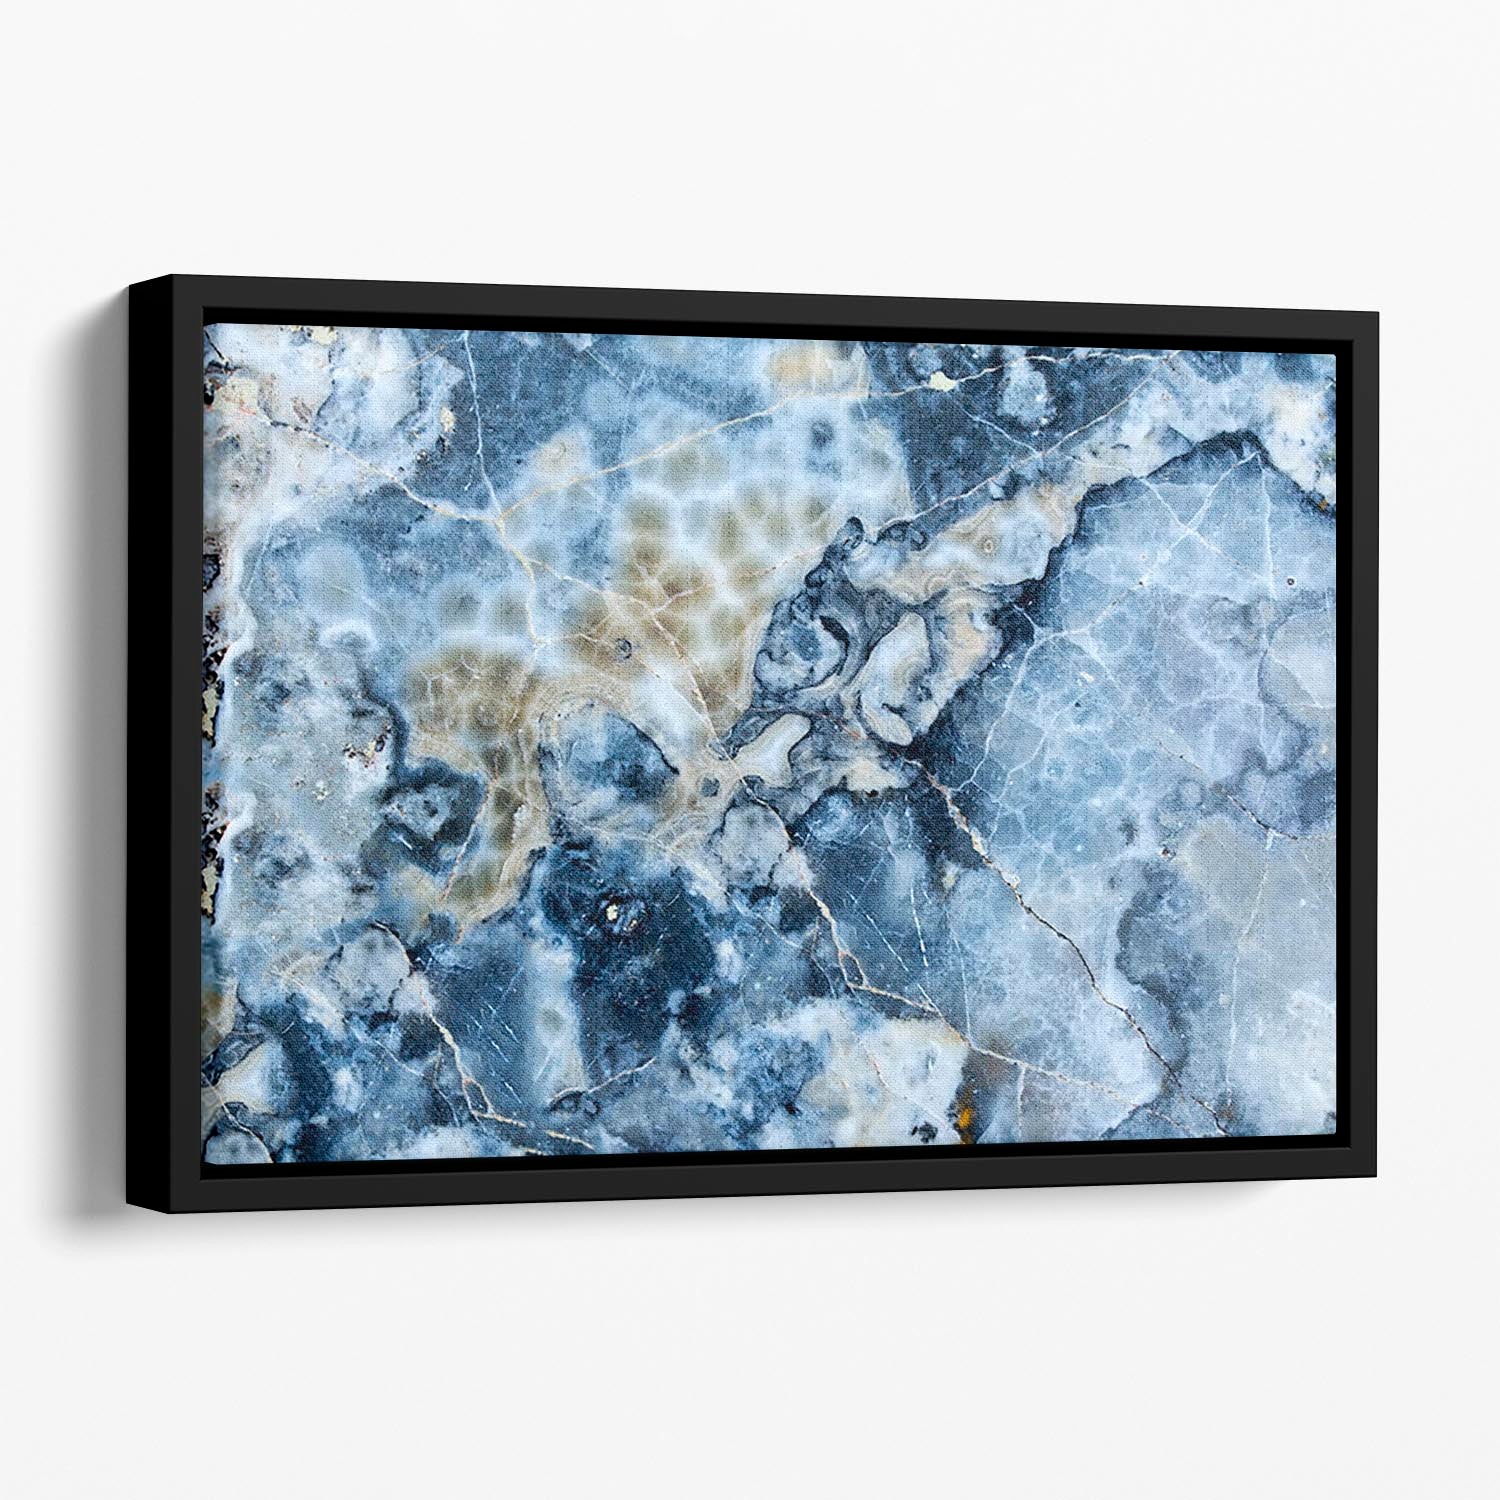 Navy Cracked and Speckled Marble Floating Framed Canvas - Canvas Art Rocks - 1